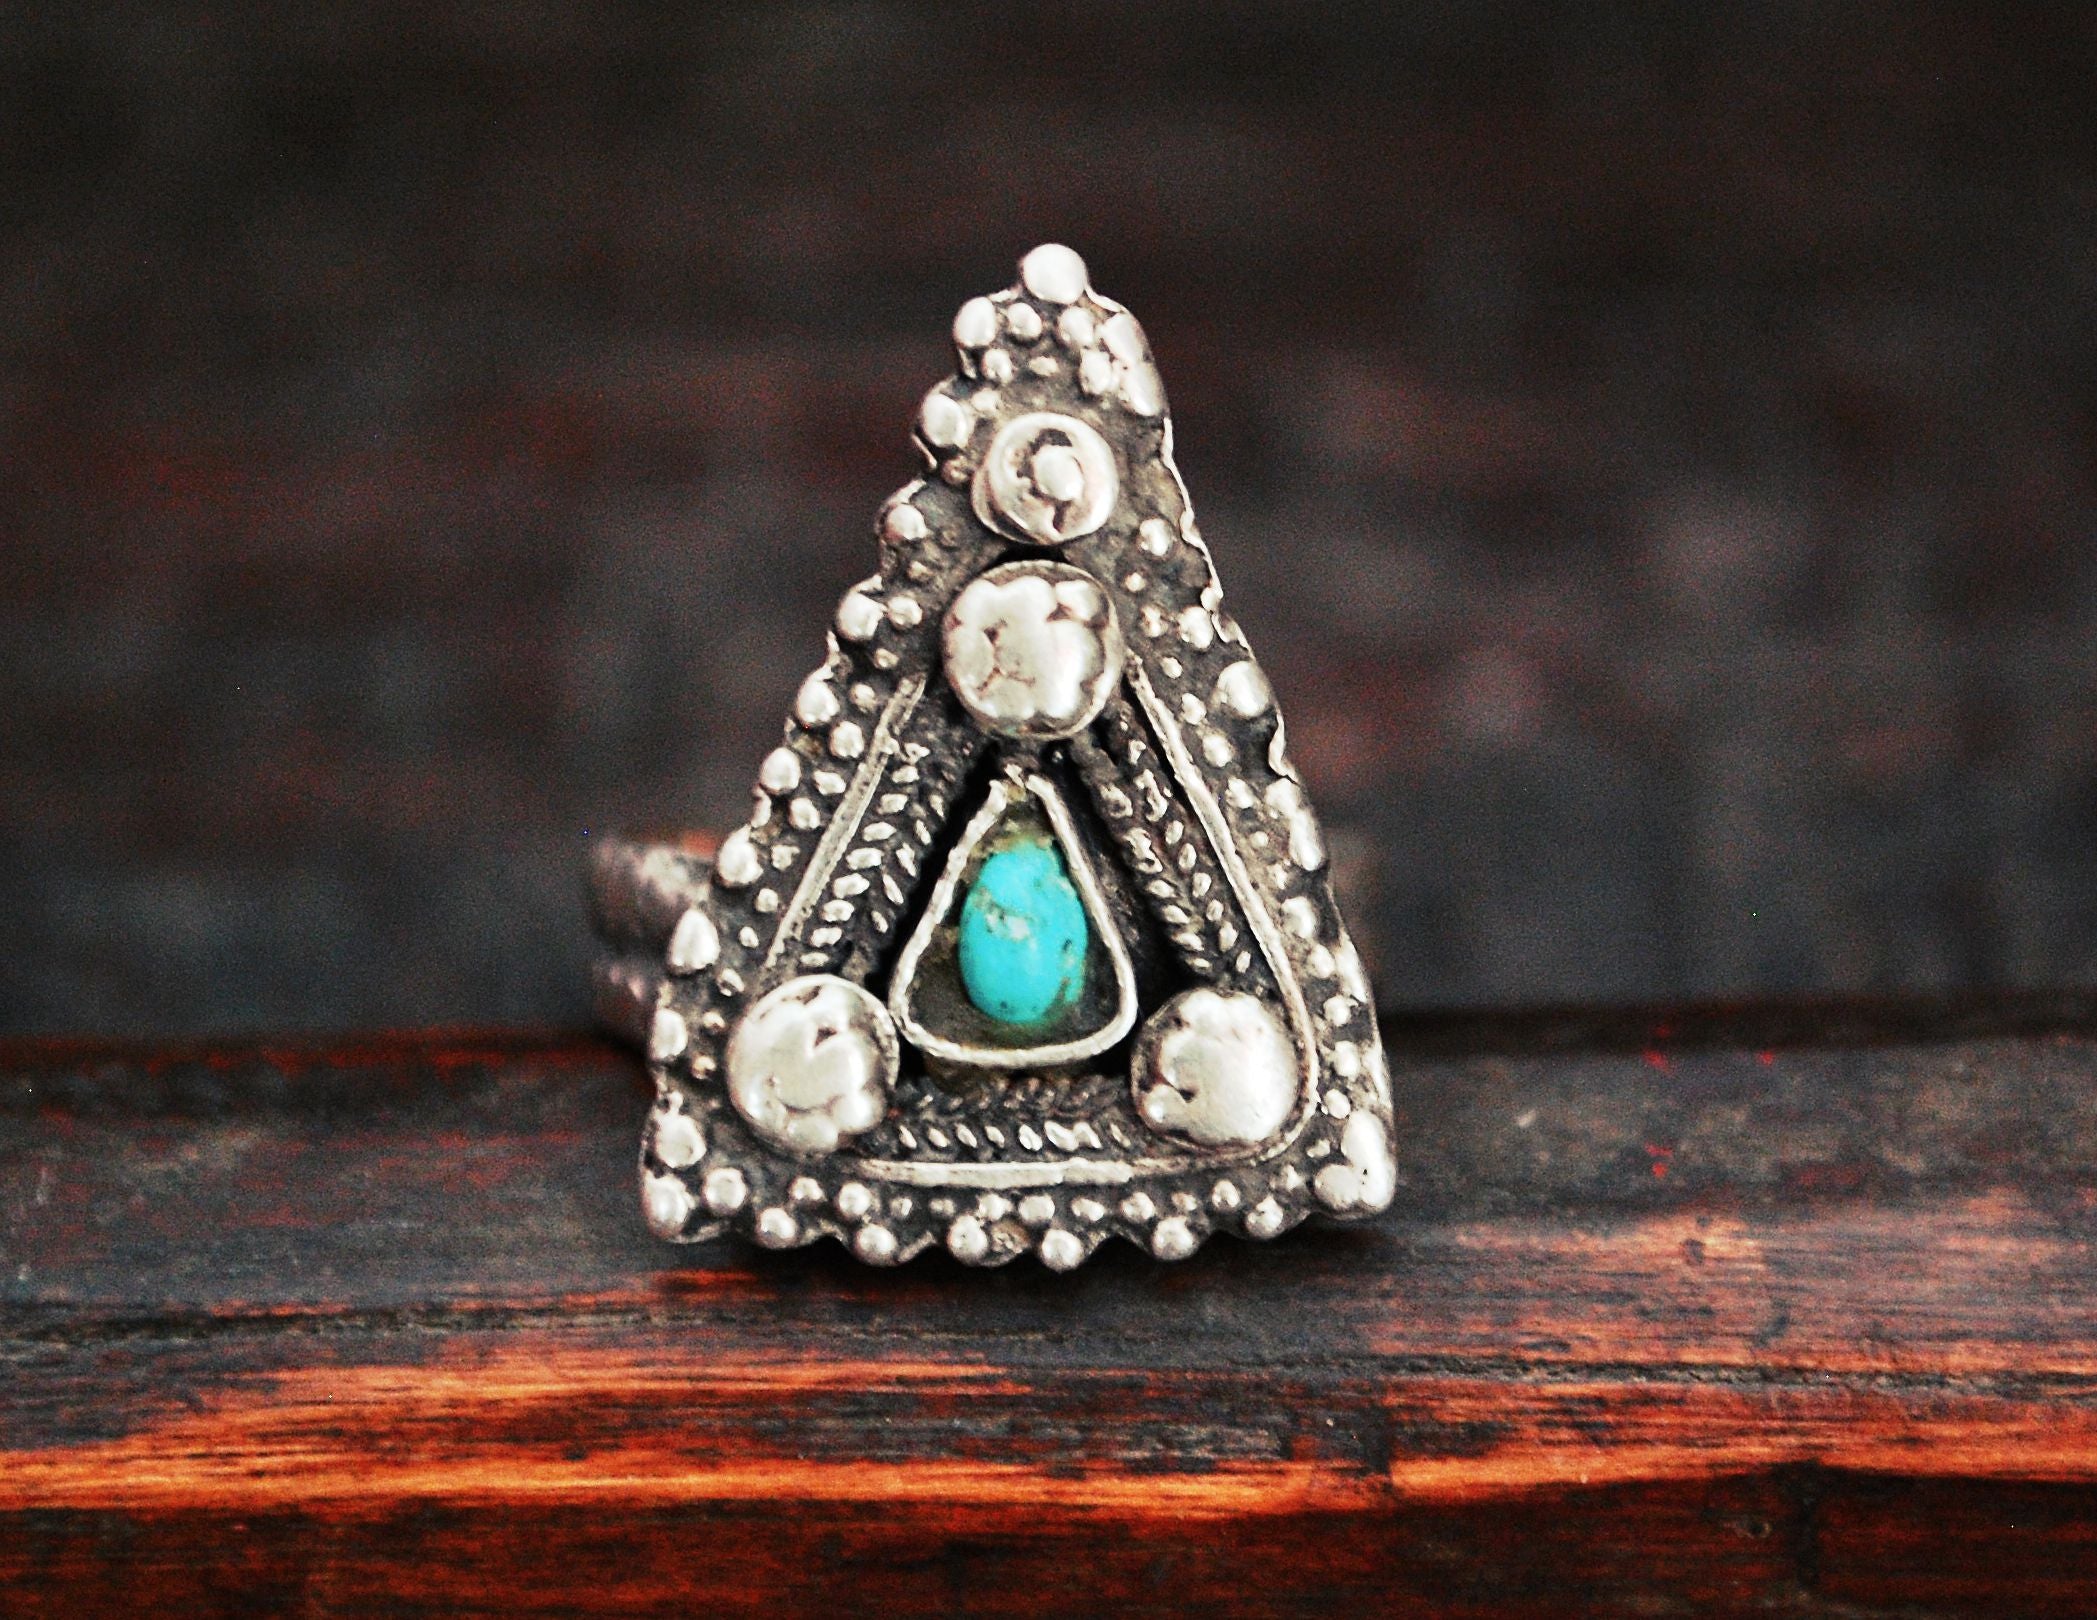 Antique Afghani Silver Ring with Turquoise - Size 8